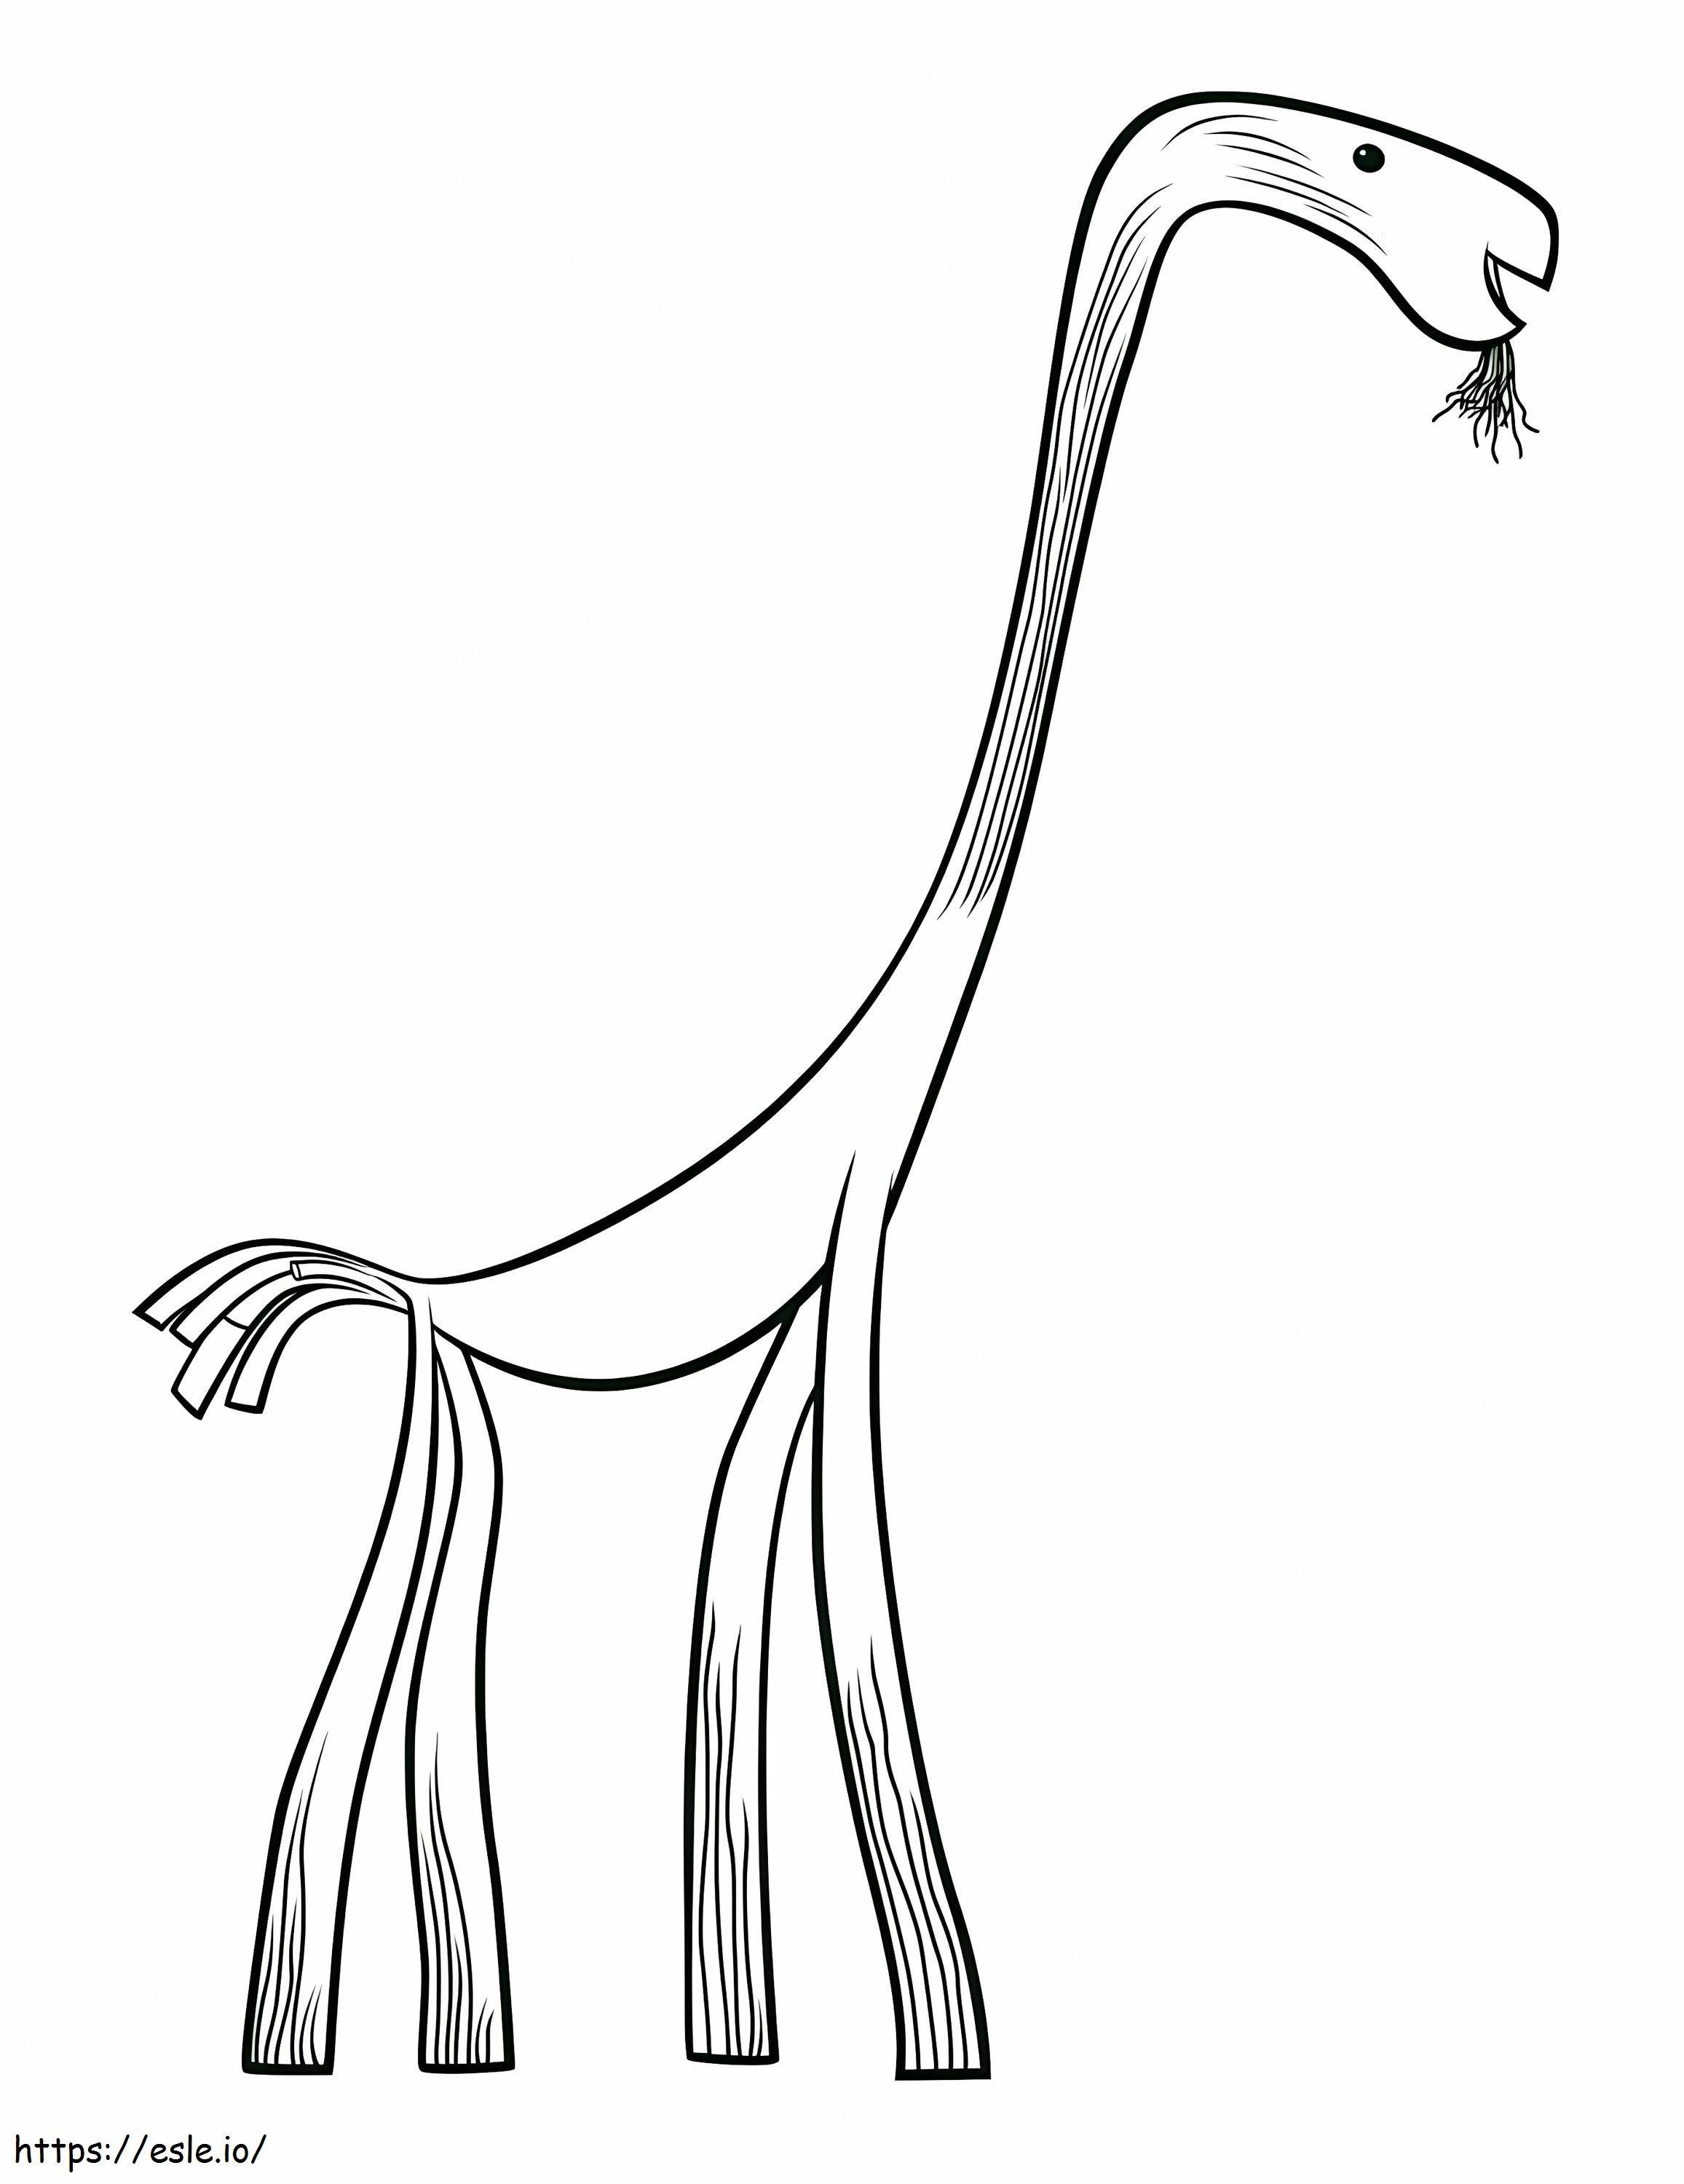 Wild Scallion coloring page